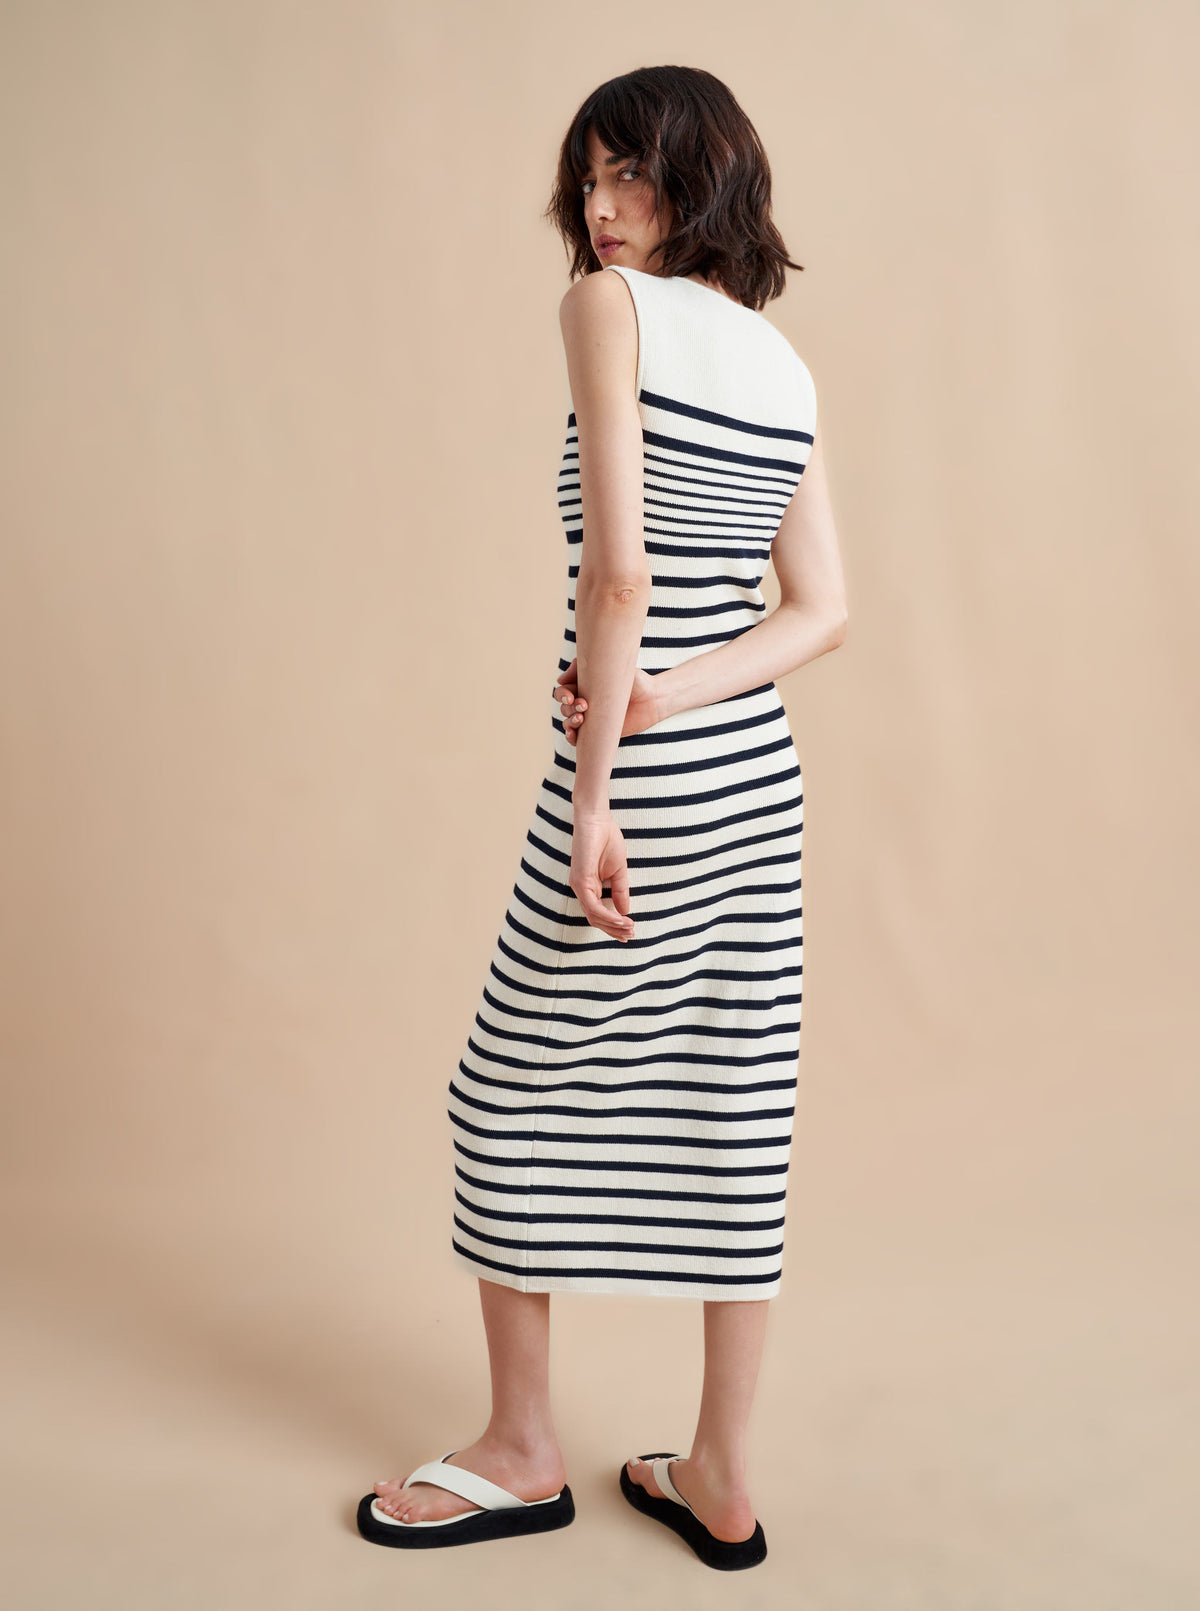 Is there anything better than a dress that does it all, from comfort, to style, to care? Meet Emmanuelle, our sleek, cotton stretch dress that slips over the head but still packs a punch on details. Made up of delicate ribbed stripes and an engineered striped design on the chest, this fitted dress with a touch of Lycra will hug you in all the right ways. Hand wash it at home and wear it again tomorrow.